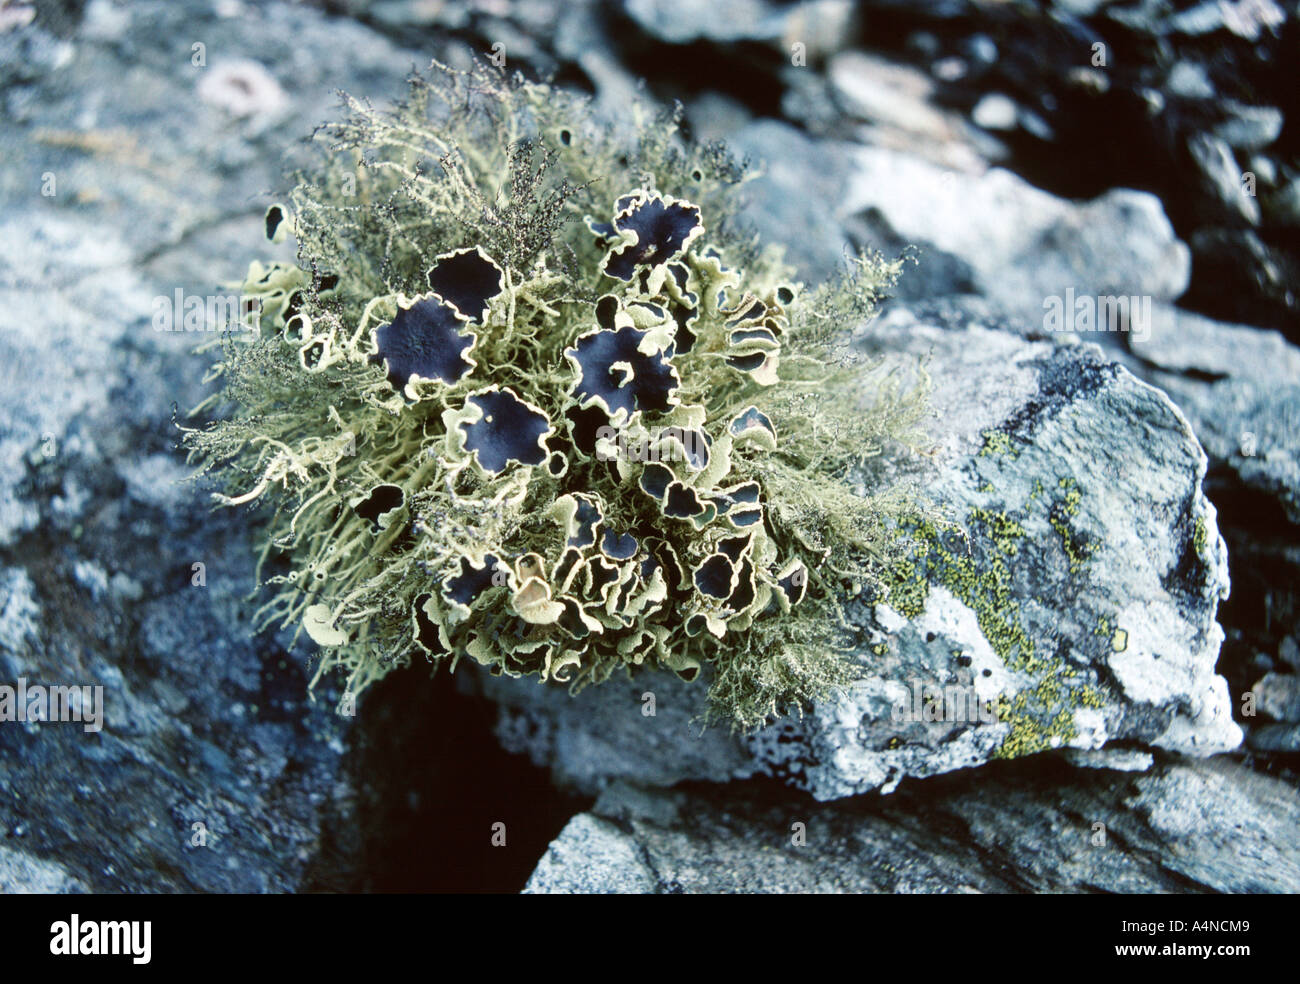 The lichen Usnea aurantiaco-atra on Lynch Island protected area South Orkney Islands Antarctica Stock Photo